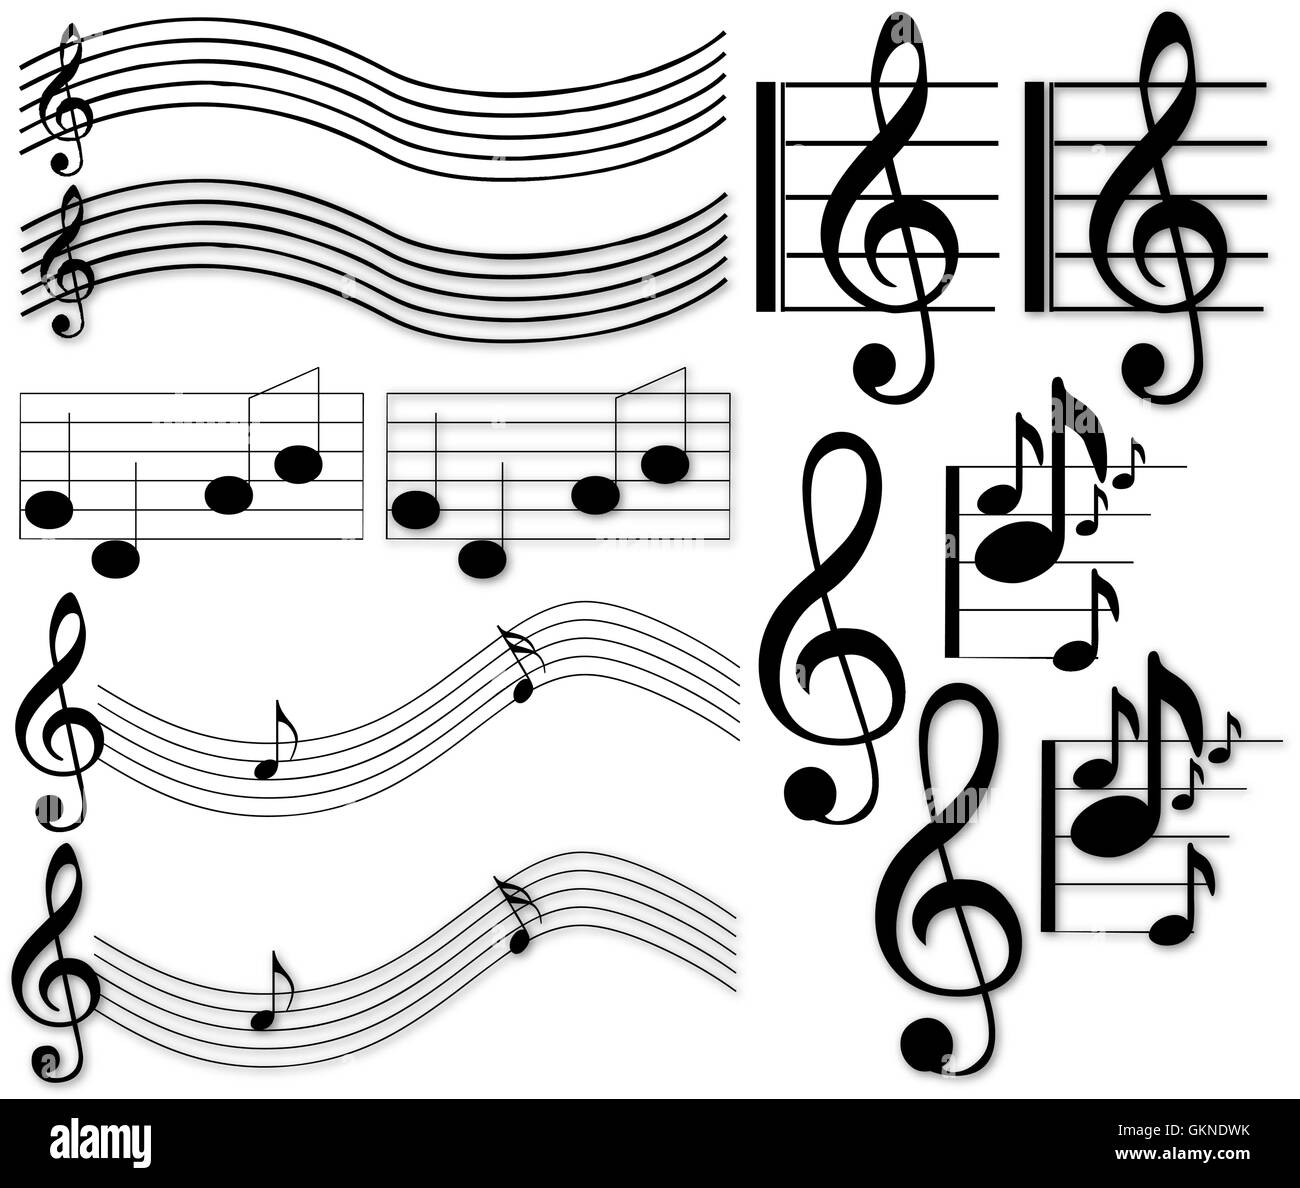 Graphic music notes vector